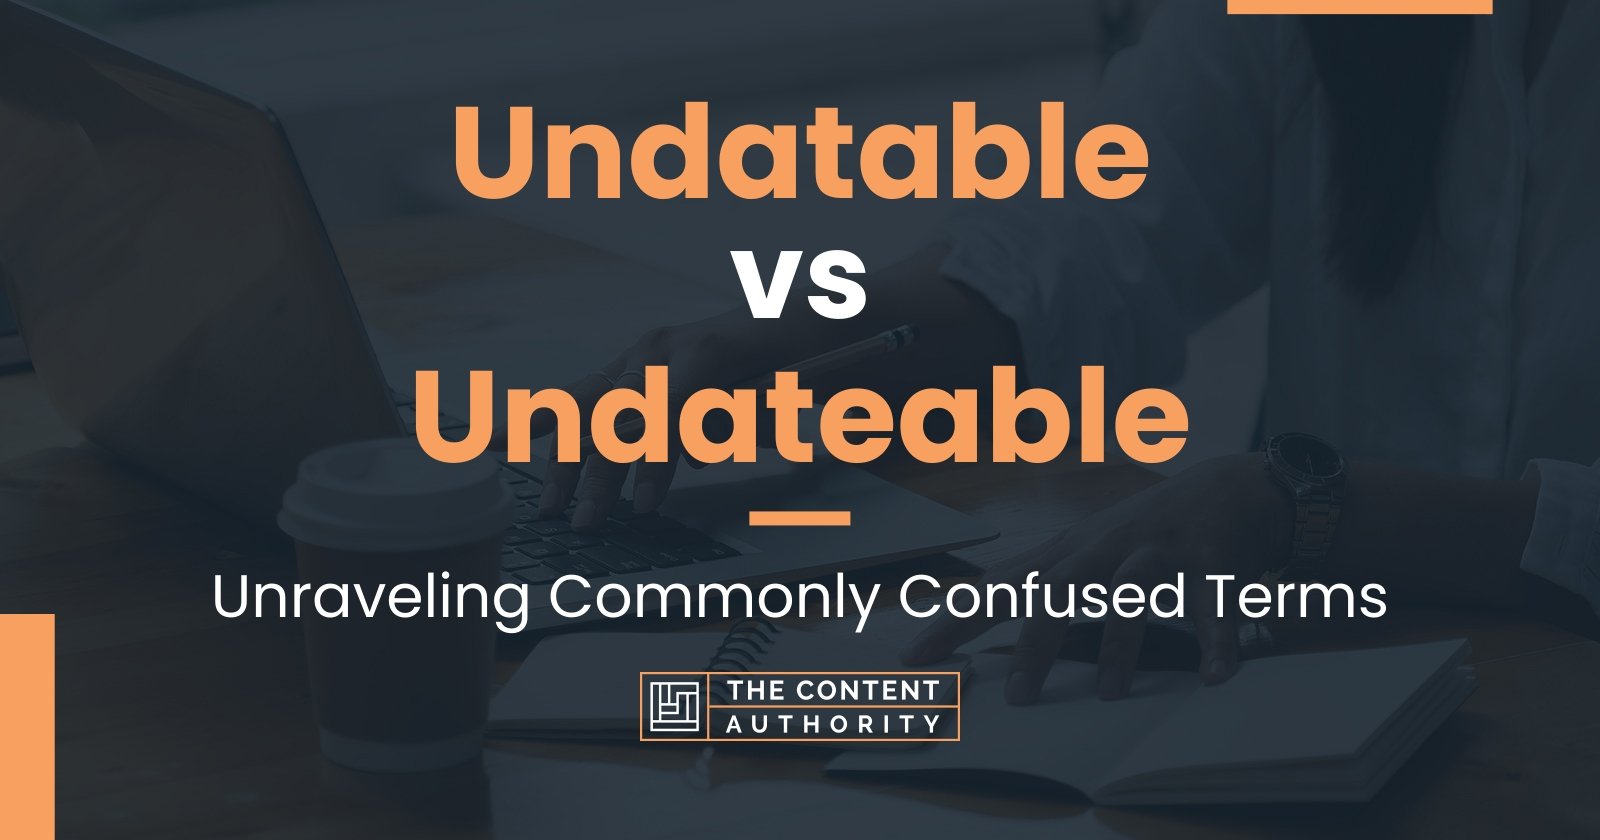 Undatable vs Undateable: Unraveling Commonly Confused Terms